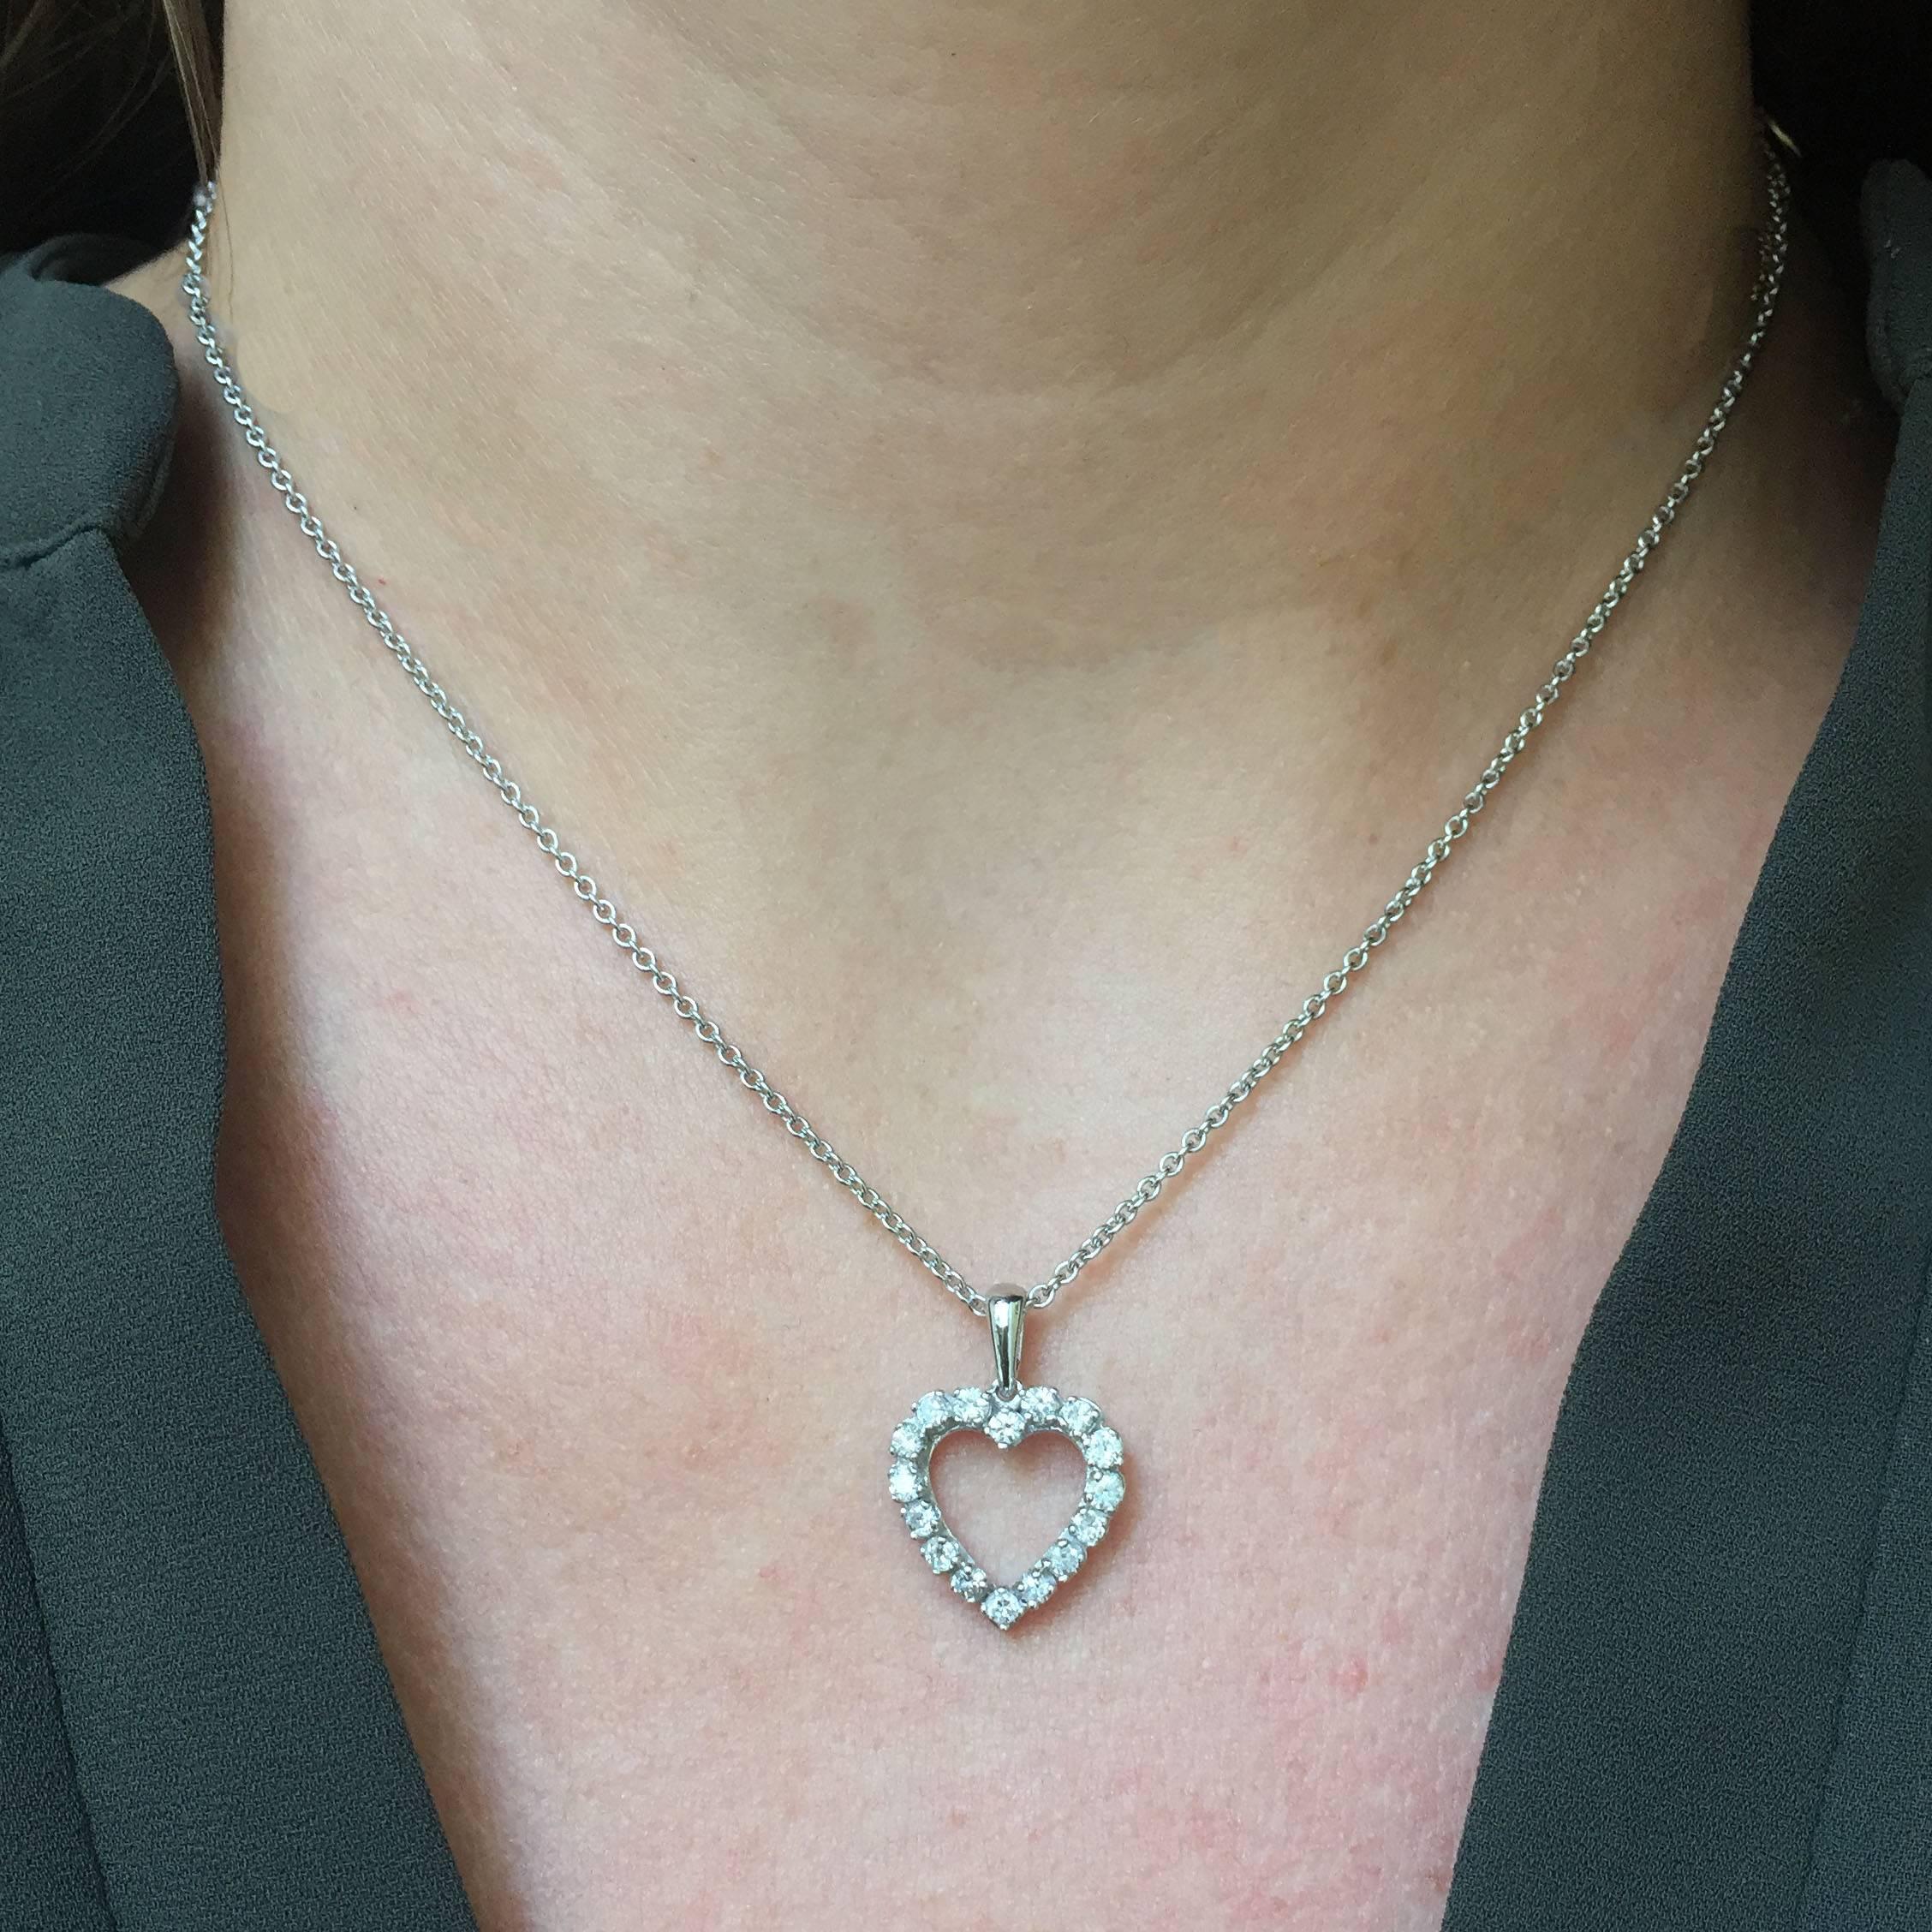 A sweet and simple gift! This 14k white gold heart-shaped pendant is set with 16 round brilliant-cut diamonds totaling approx. 0.96 carat. Pendant measures approx. 21mm x 15 mm (including bail) and hangs from a 16" cable chain secured with a